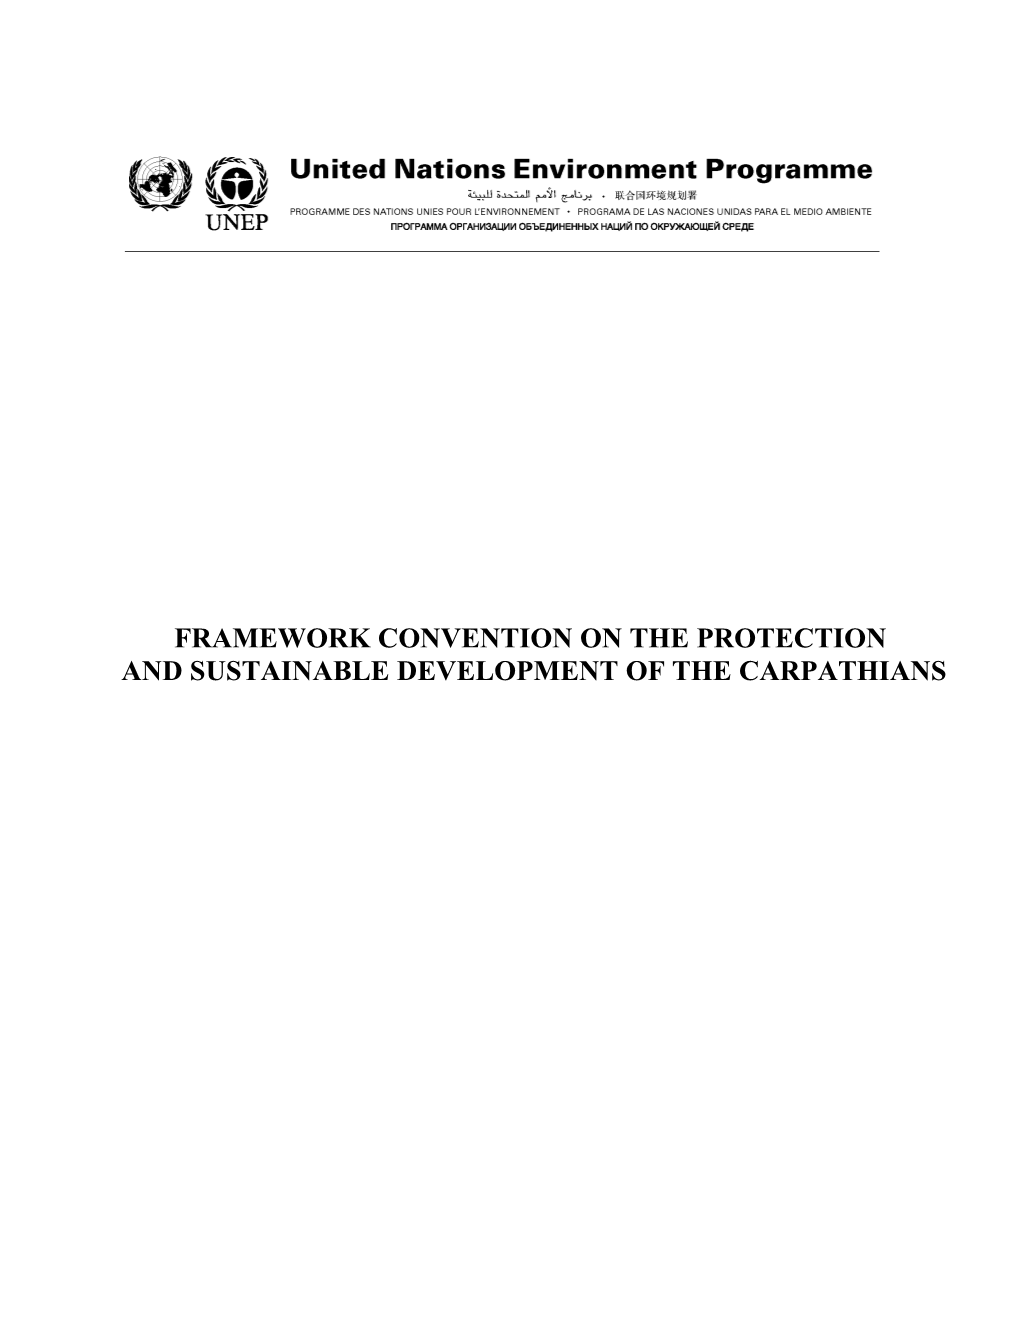 Framework Convention on the Protection